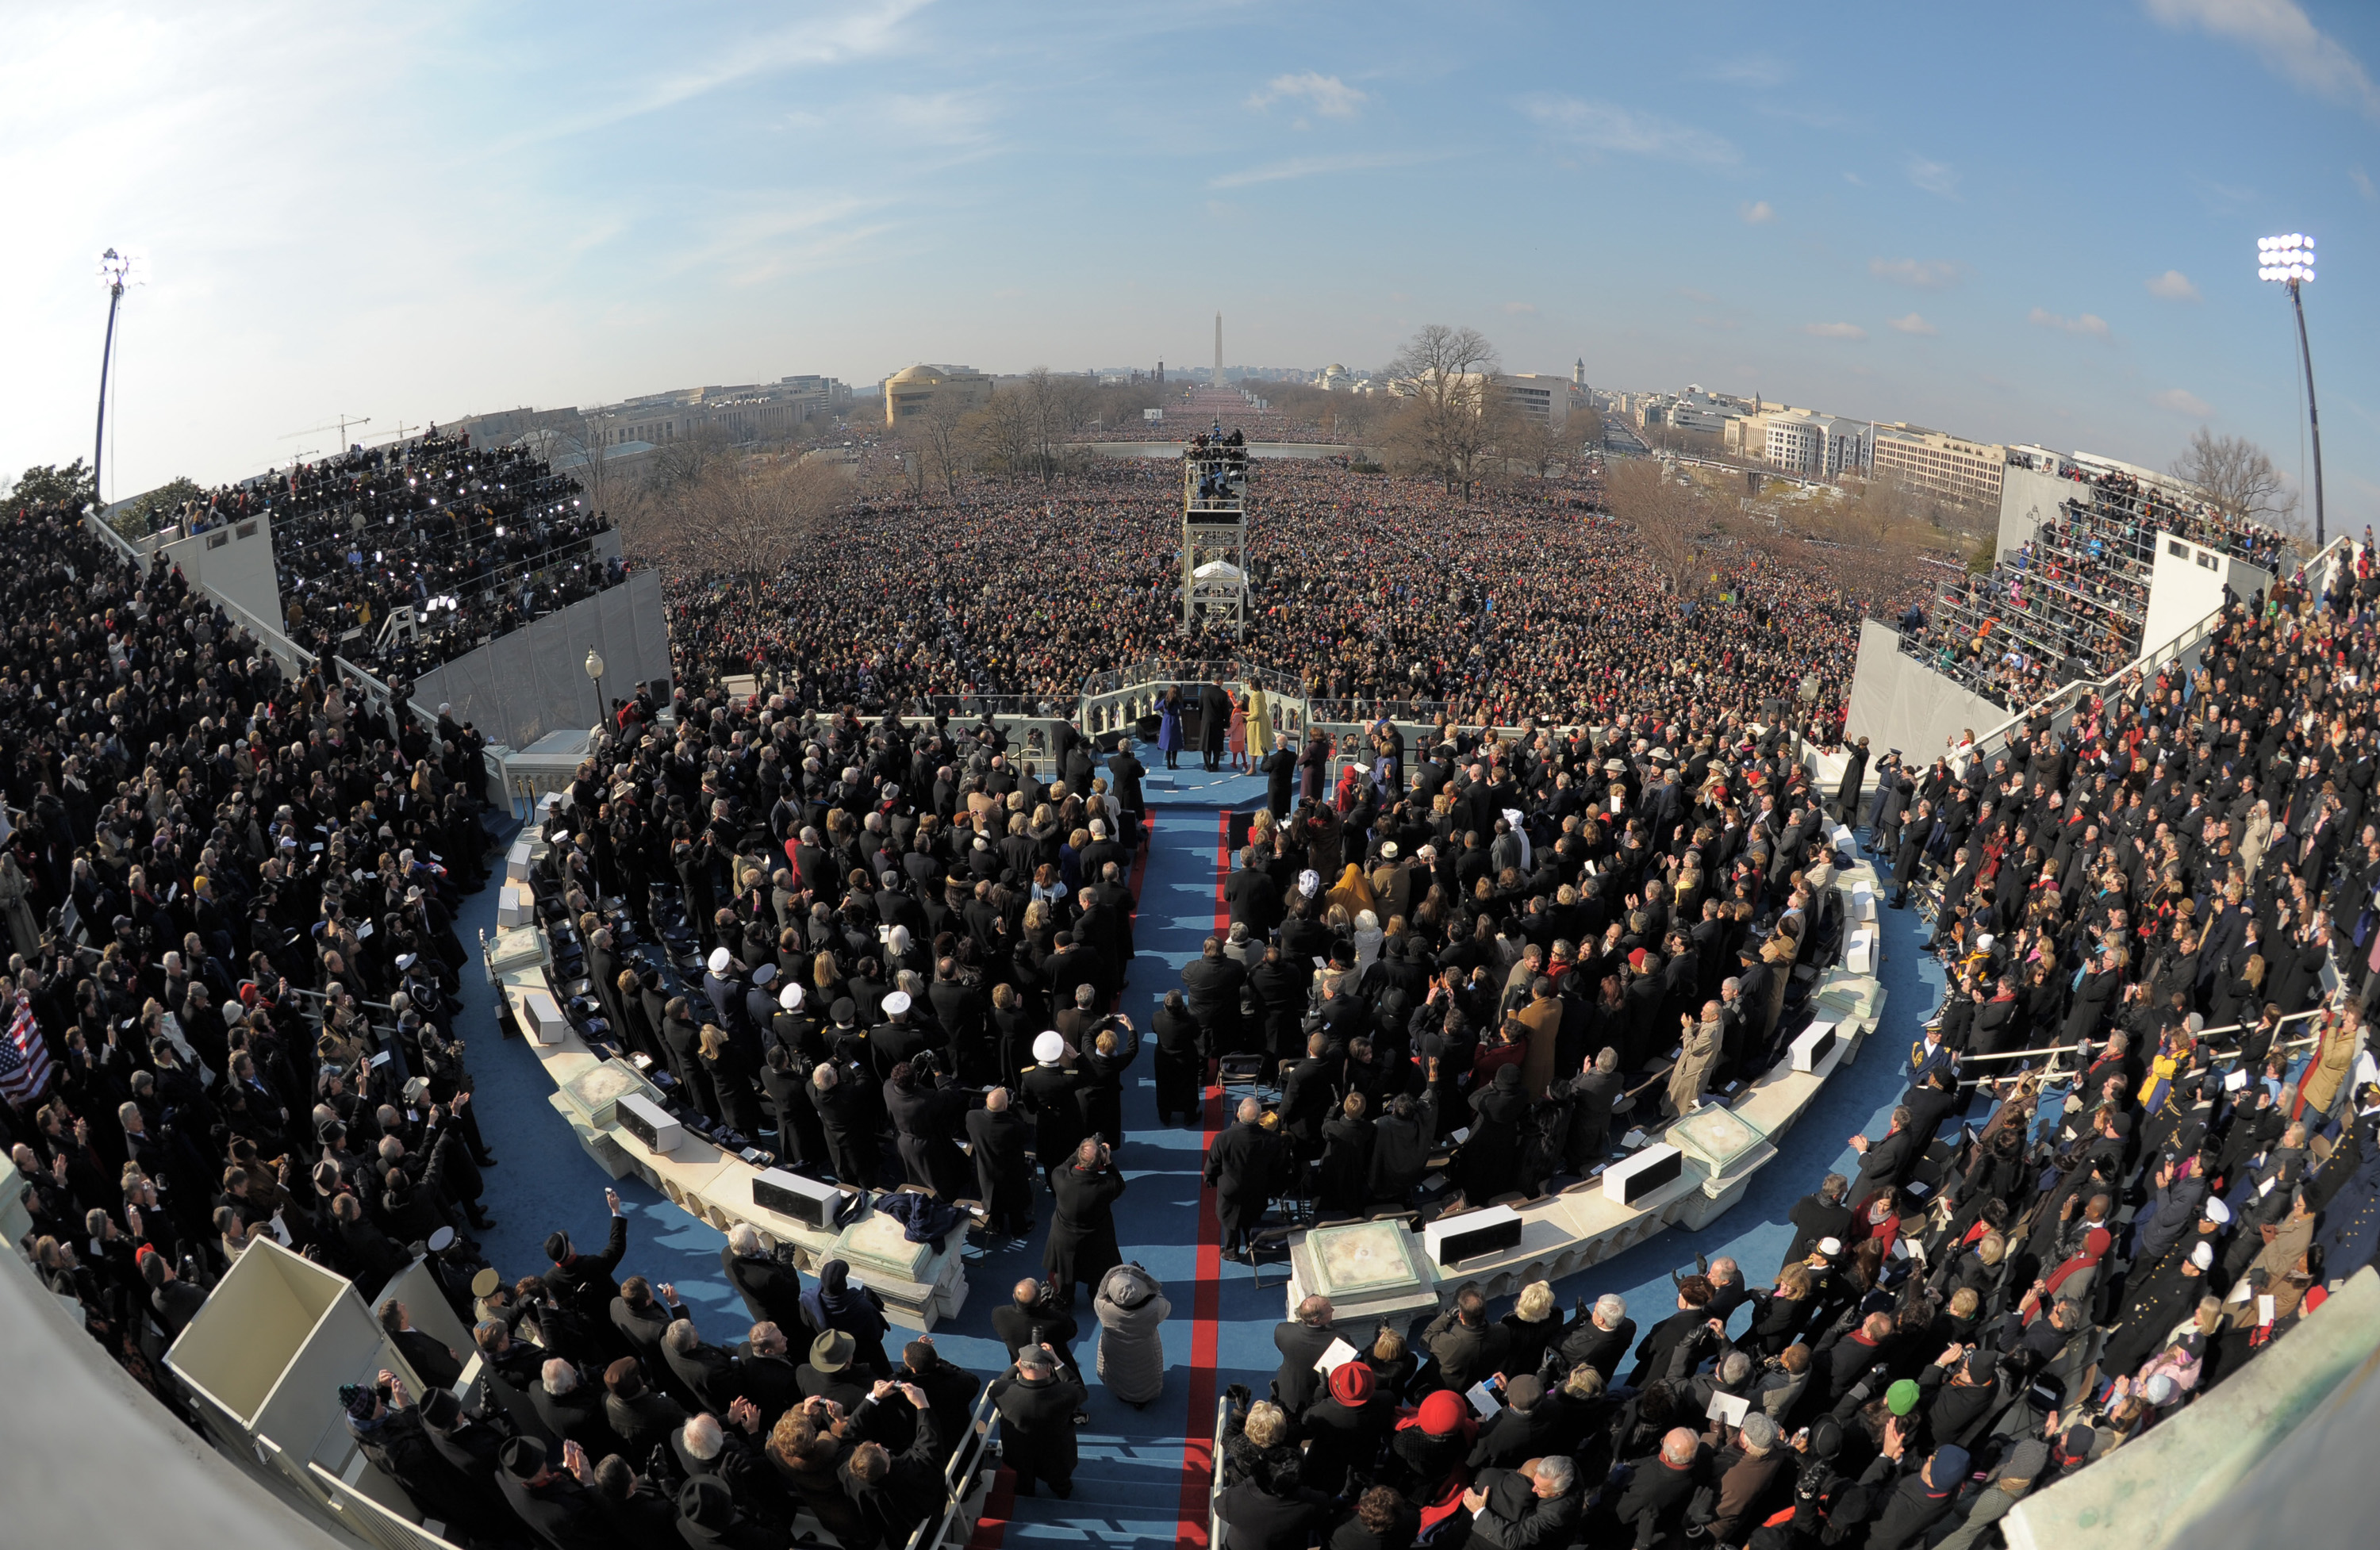 How Many People Attended Trump’s Inauguration vs. Obama’s?